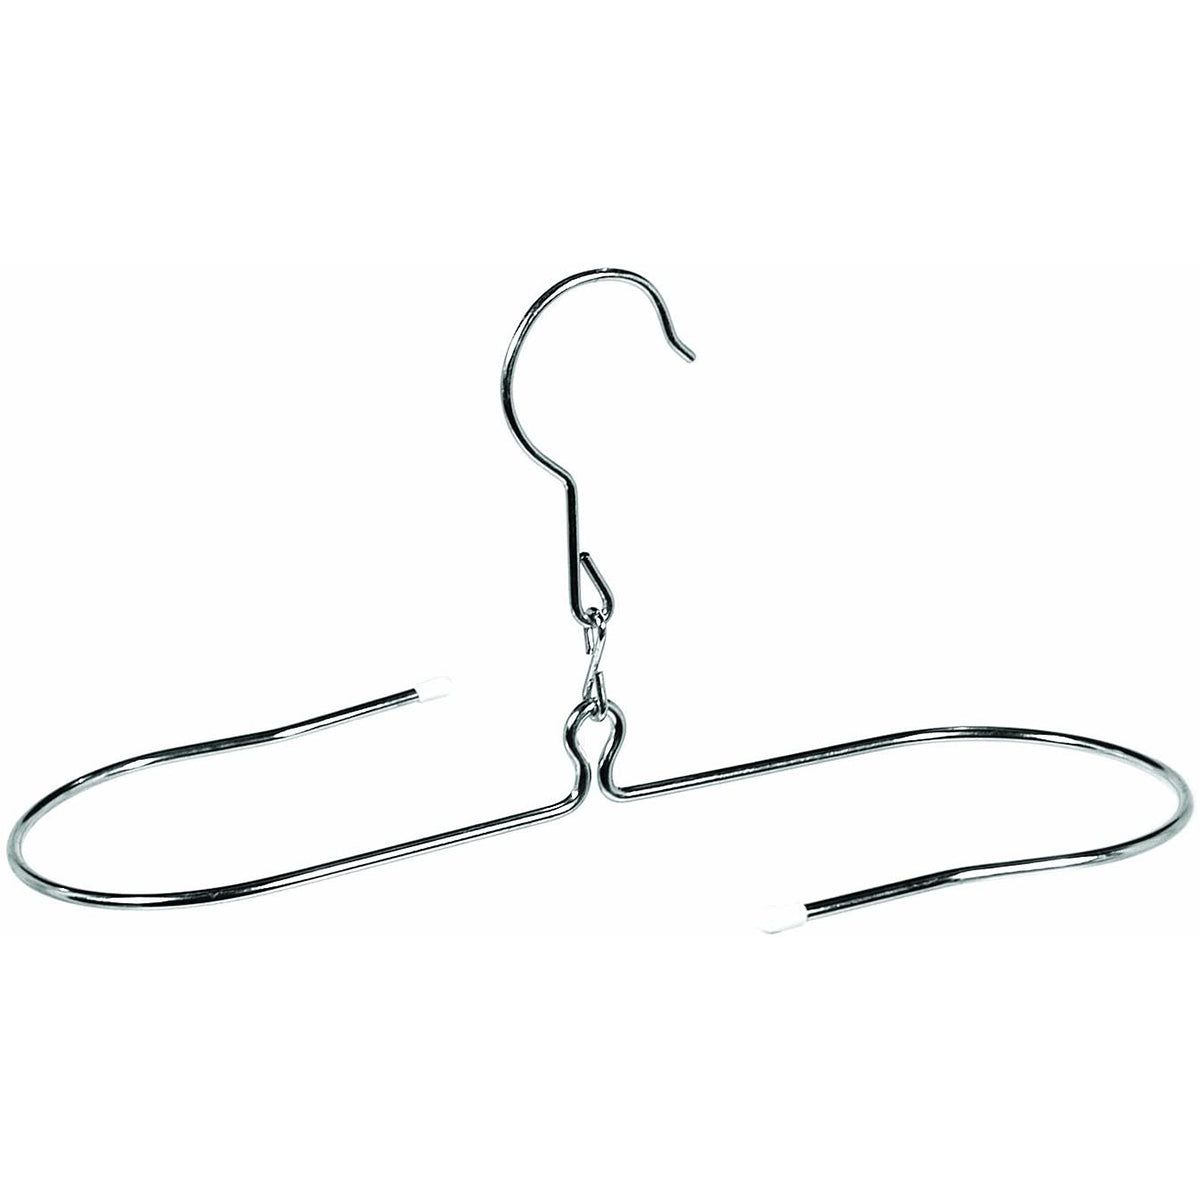 Eagle Claw Deluxe Boot Hanger - Black Eagle Claw